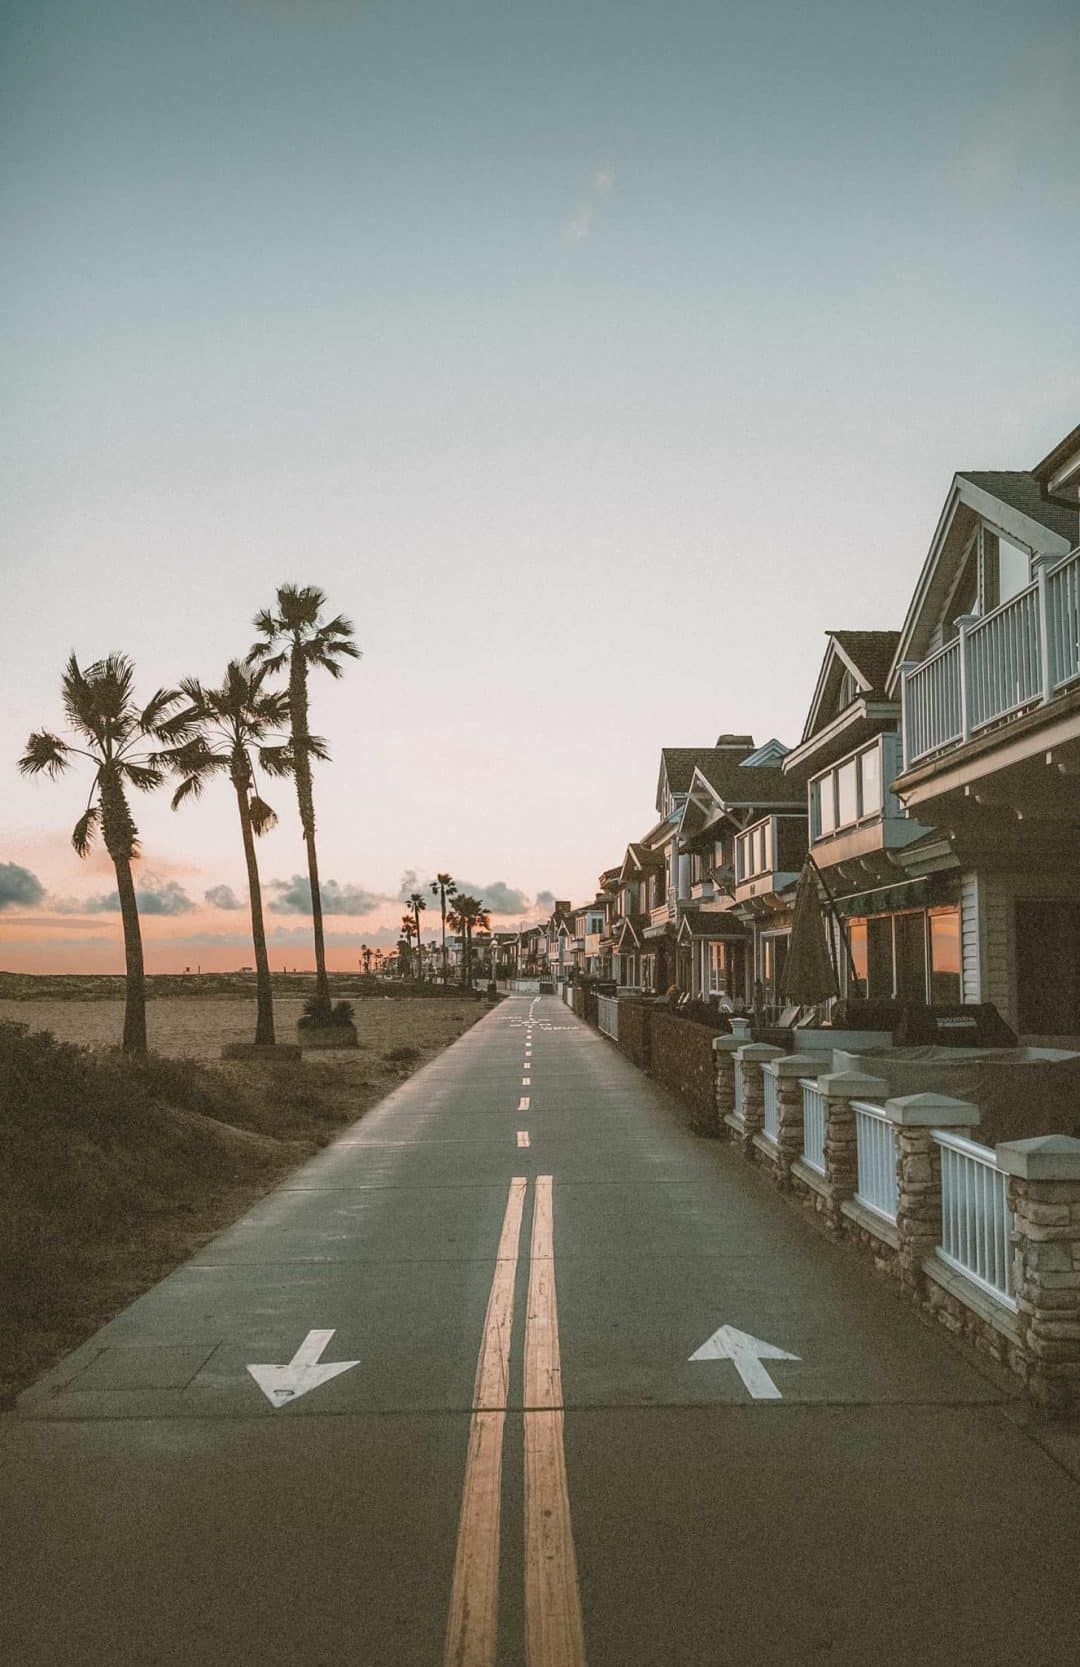 A view of the Newport Beach Bike path at sunset, with three palm trees on the beach to the left, and a row of beach houses to the right.